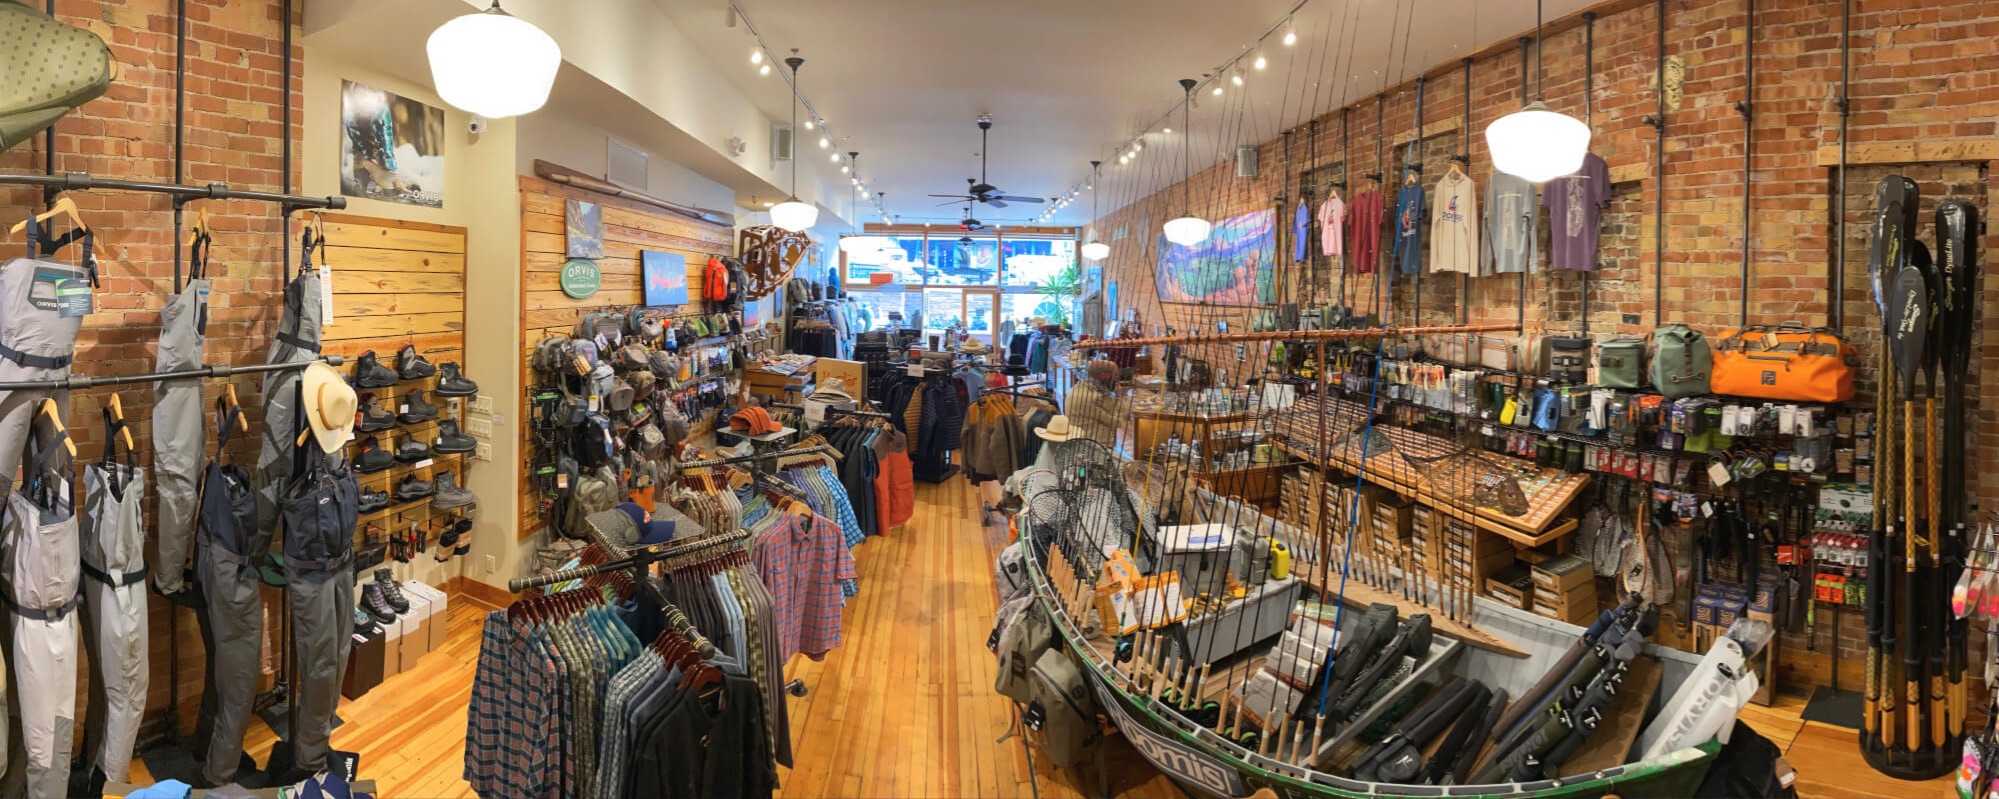 Step inside the world of Hooker Flyfishing with this intriguing photo, providing a glimpse into the inviting ambiance of their shop in Glenwood Springs, CO. Immerse yourself in the world of angling as you explore the array of flyfishing gear and expertise within the walls of Hooker Flyfishing. This image captures the essence of a haven for fishing enthusiasts and showcases the inviting atmosphere of the shop.